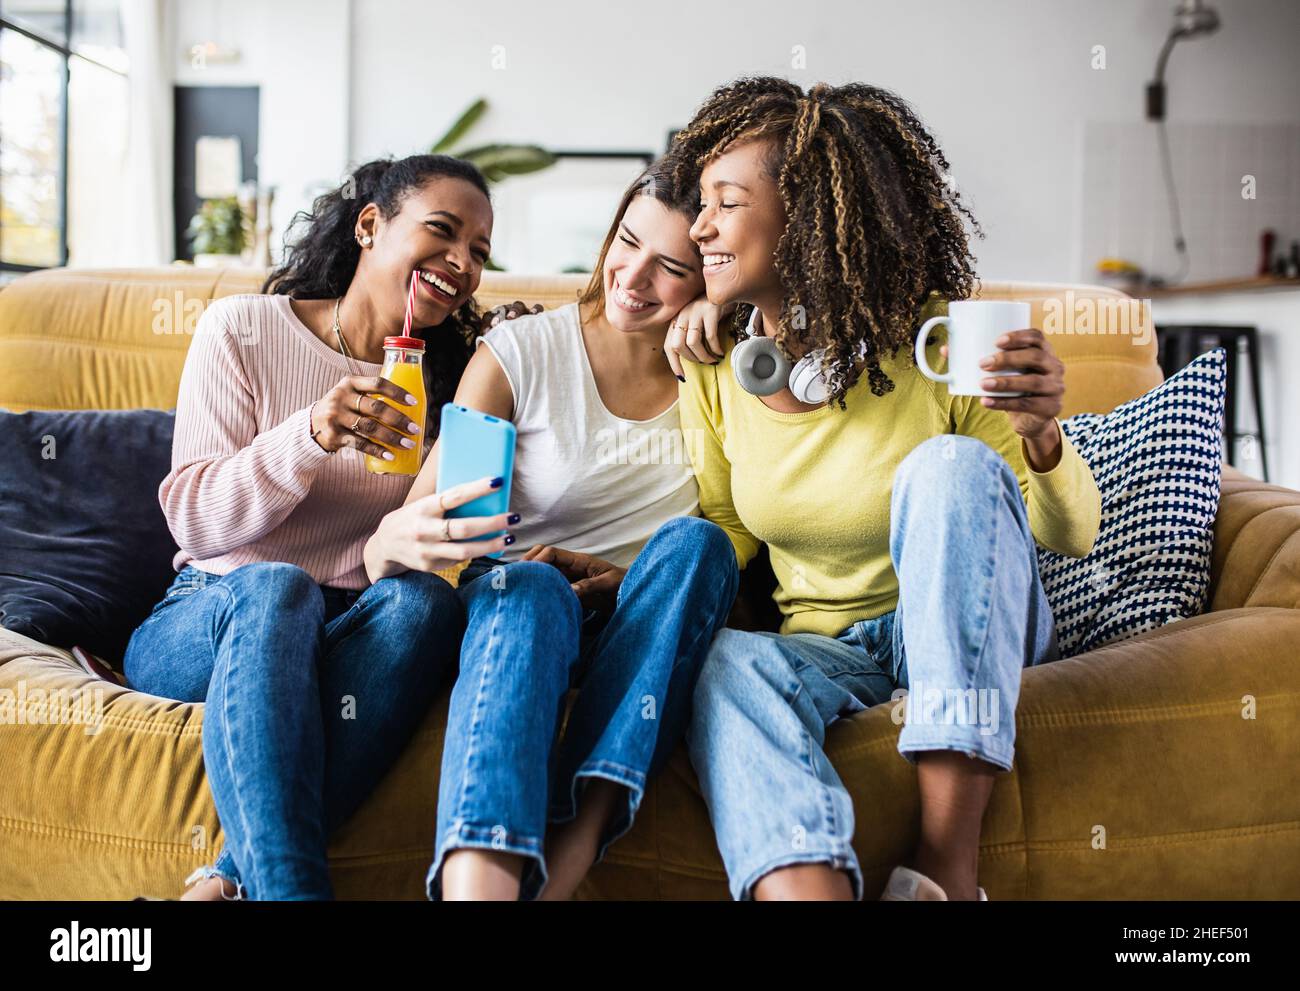 Cheerful multiracial female friends enjoying free time together at home Stock Photo